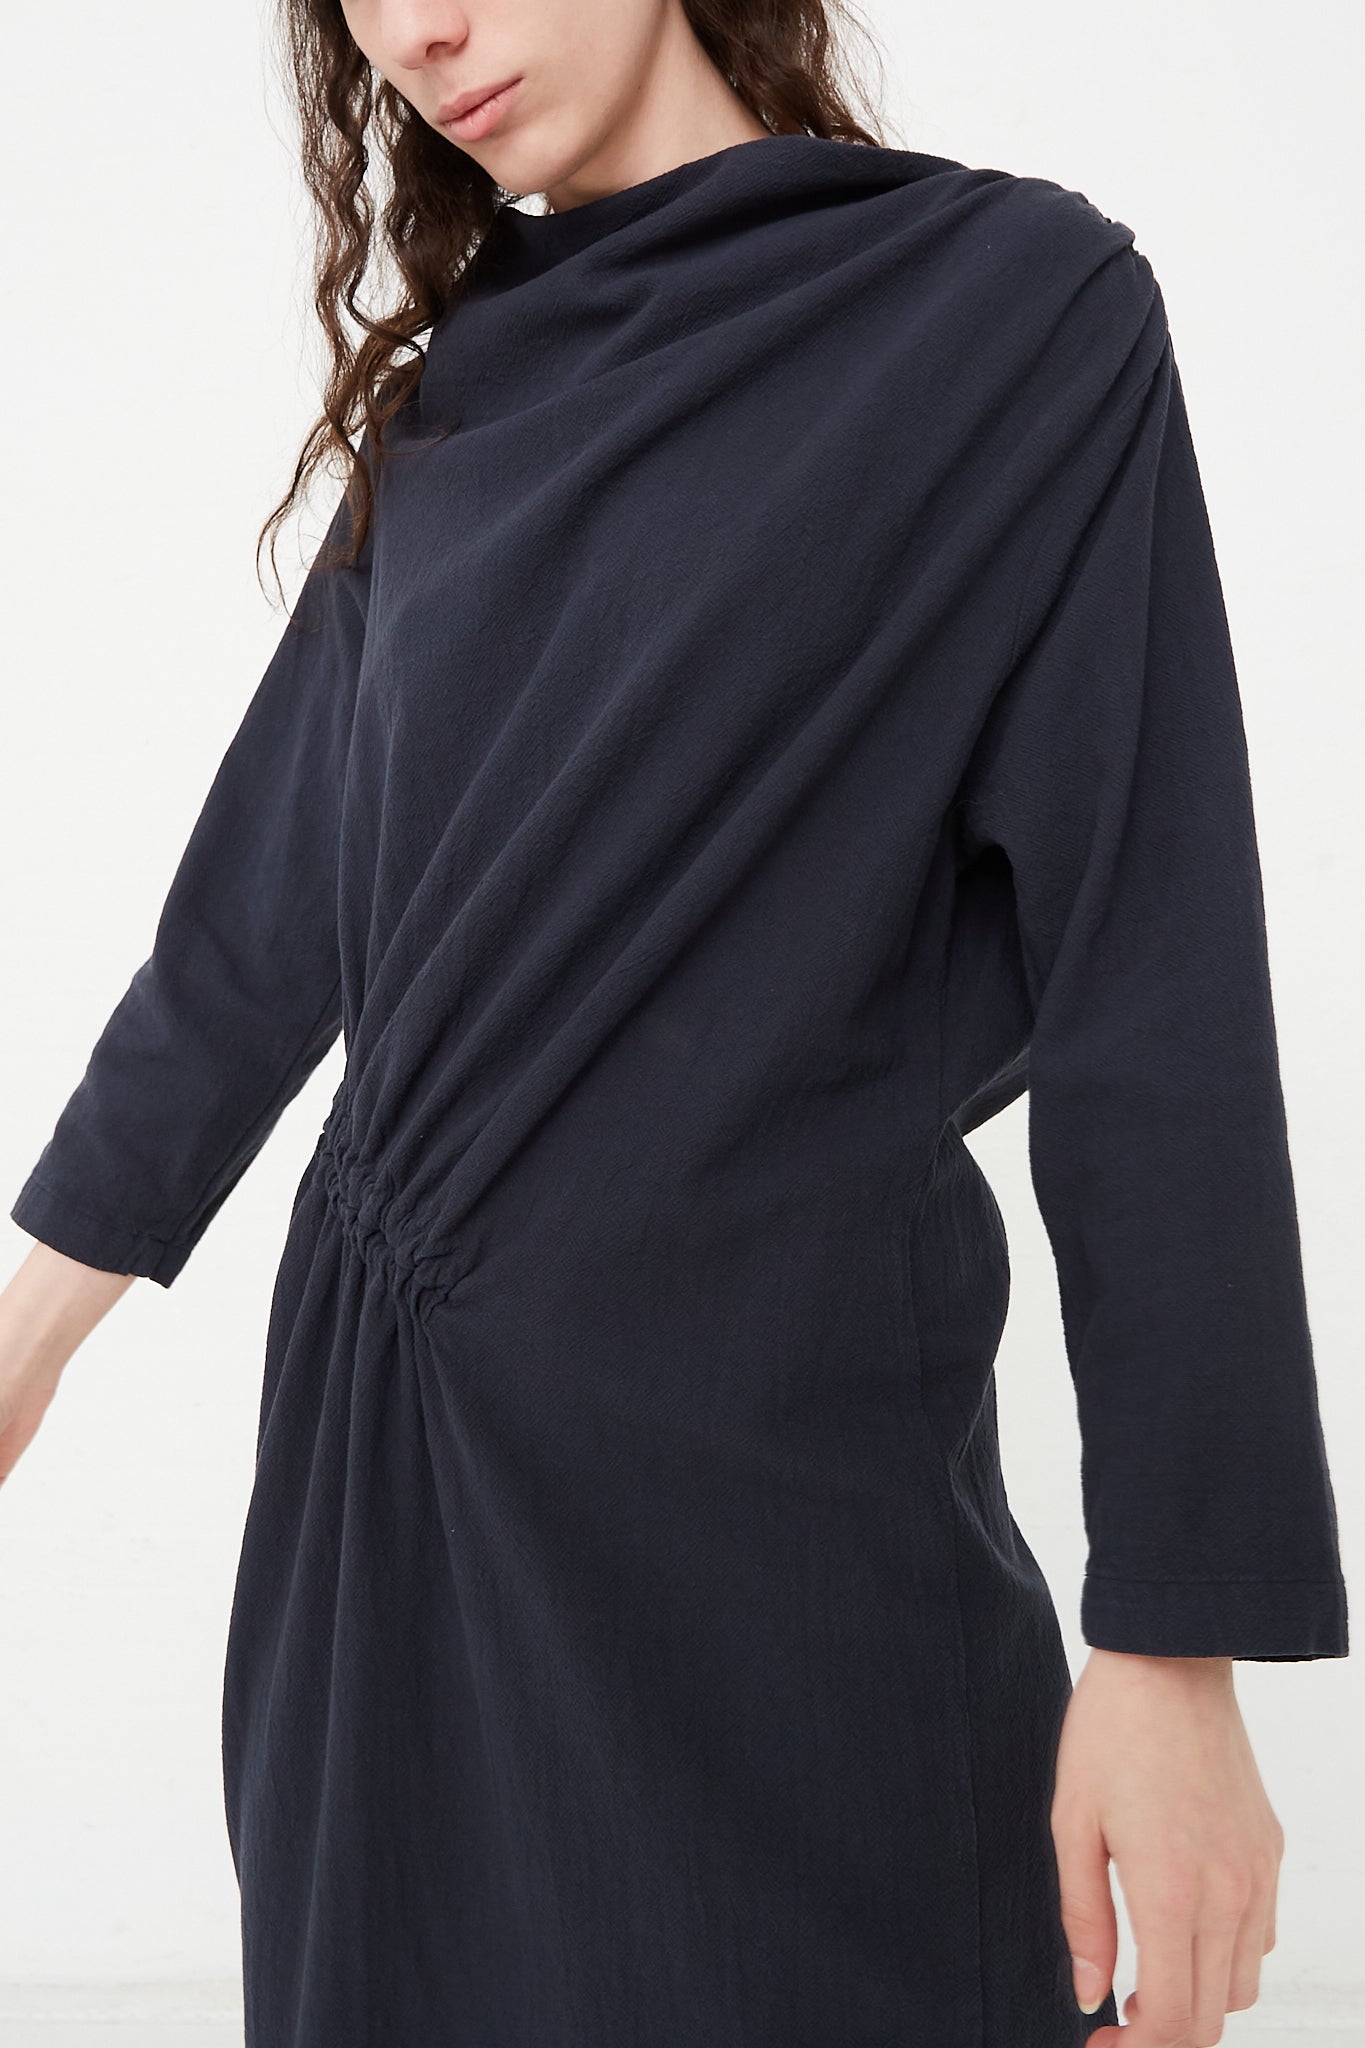 Cotton Woven Ruched Dress in Dark Navy by Black Crane for Oroboro Front Upclose